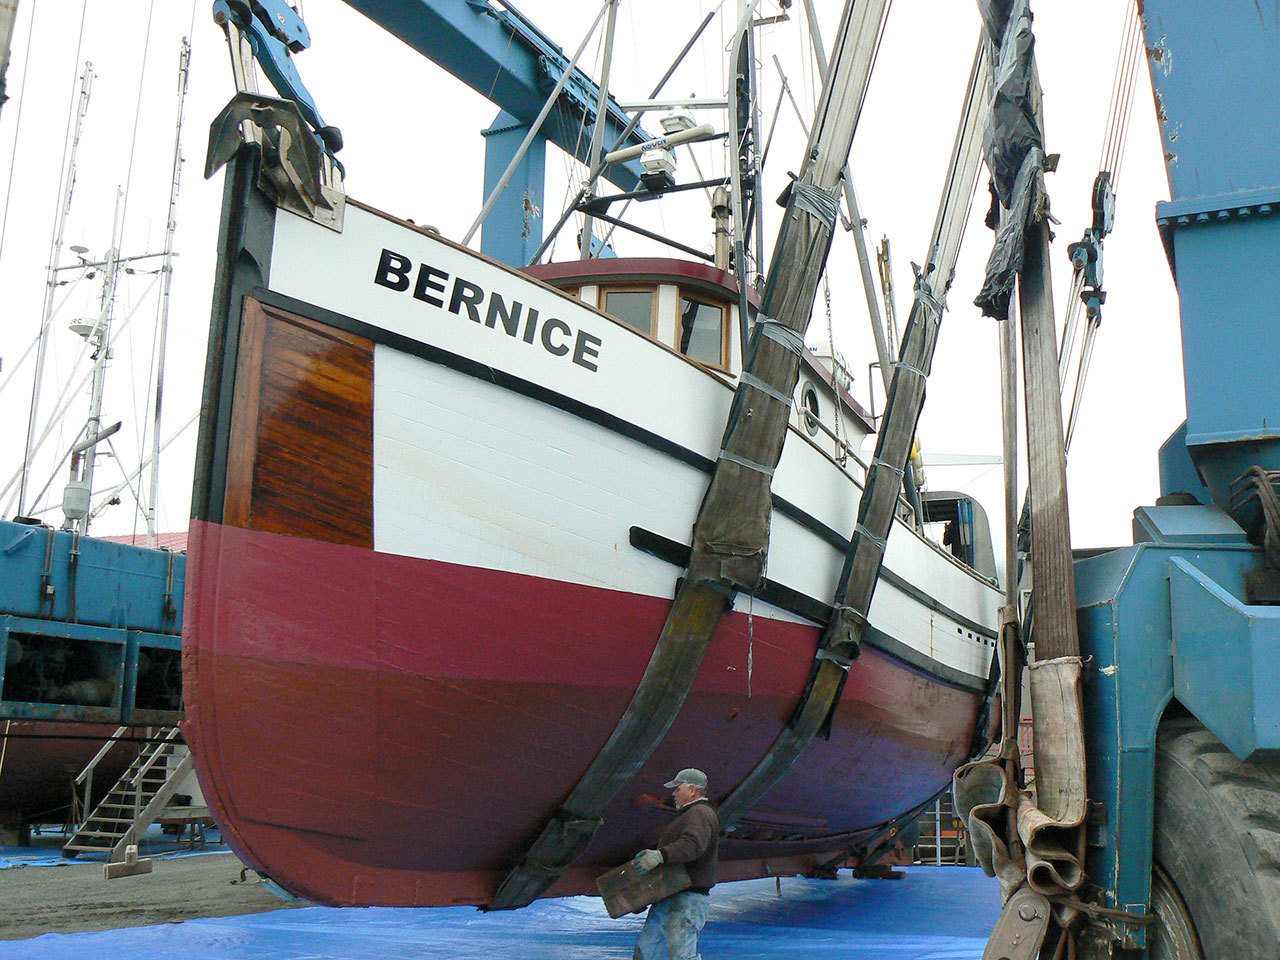 A 56-foot fishing vessel, Bernice, sits in its boat lift at the Boat Haven Marina in Port Townsend.